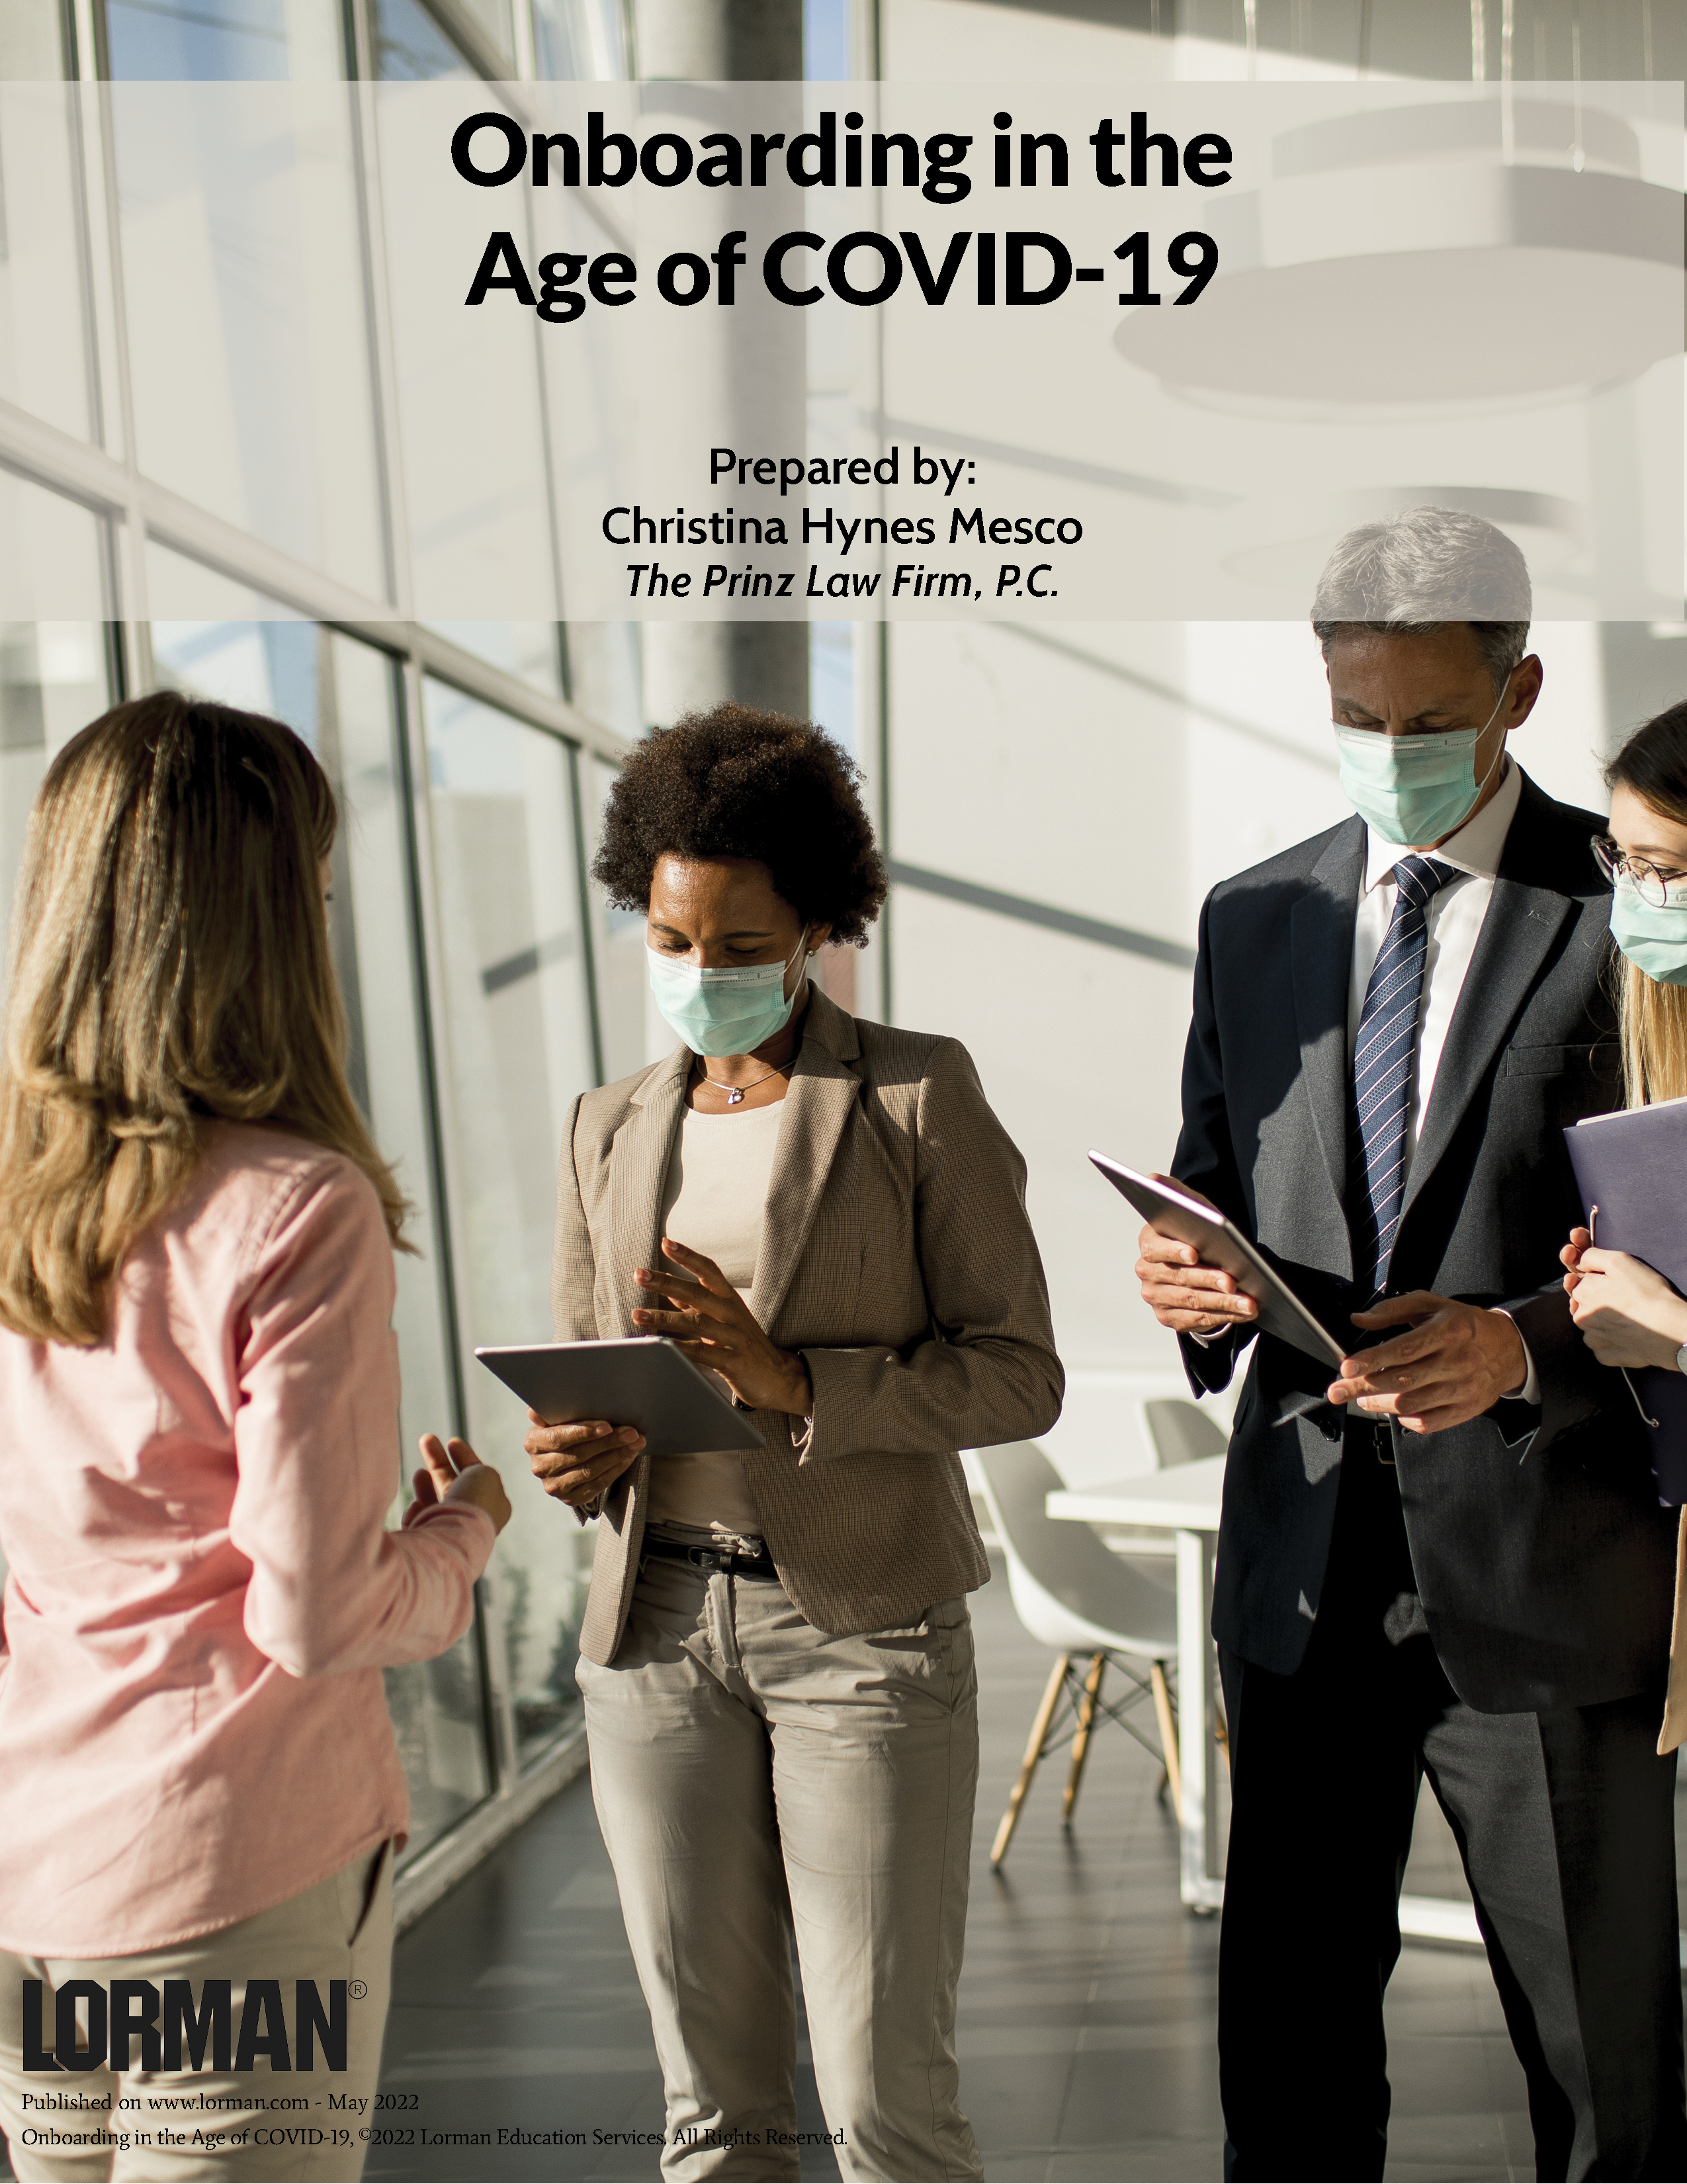 Onboarding in the Age of COVID-19